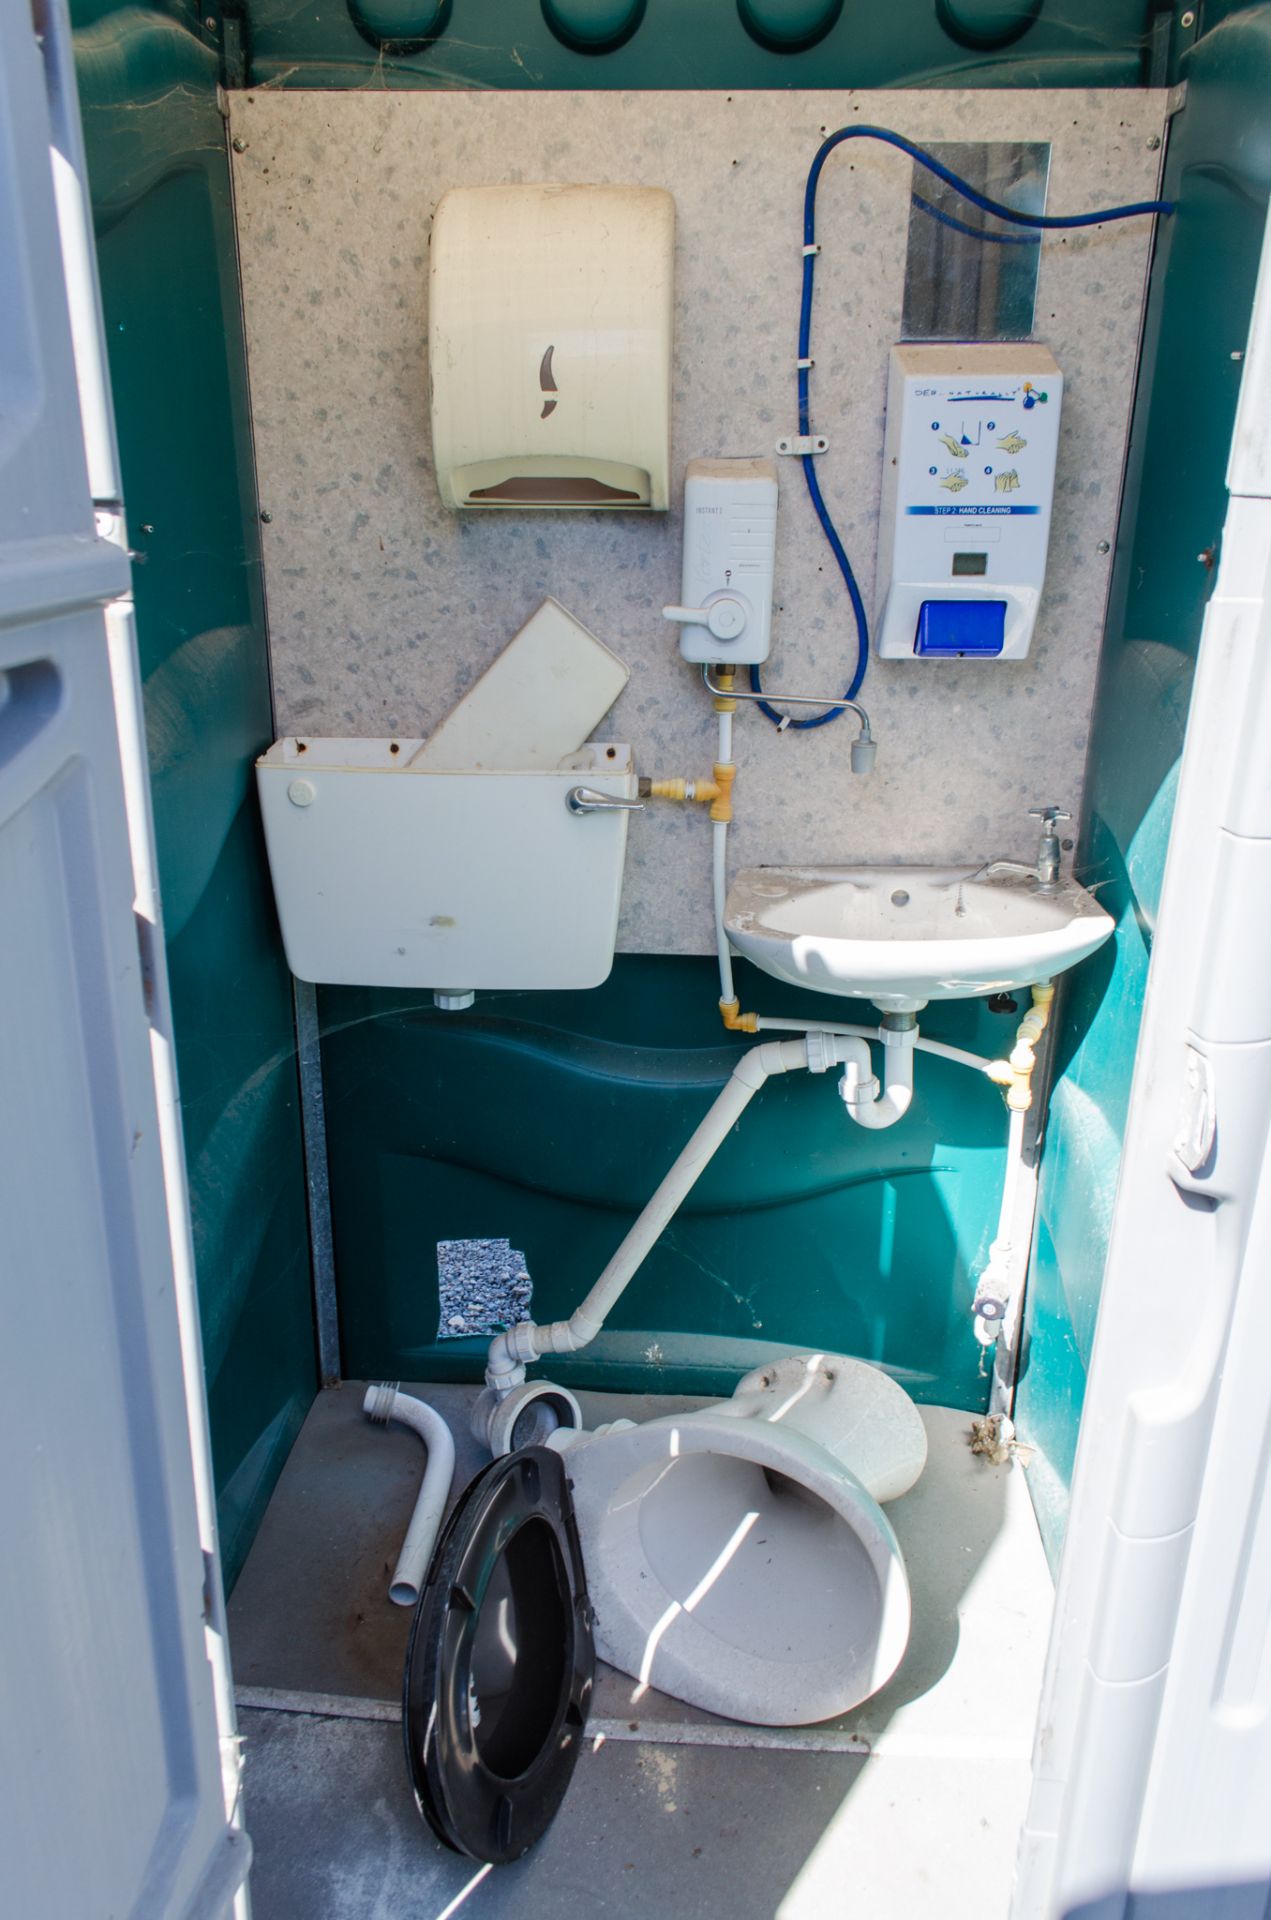 Plastic portable mains toilet 1397 - Image 3 of 3